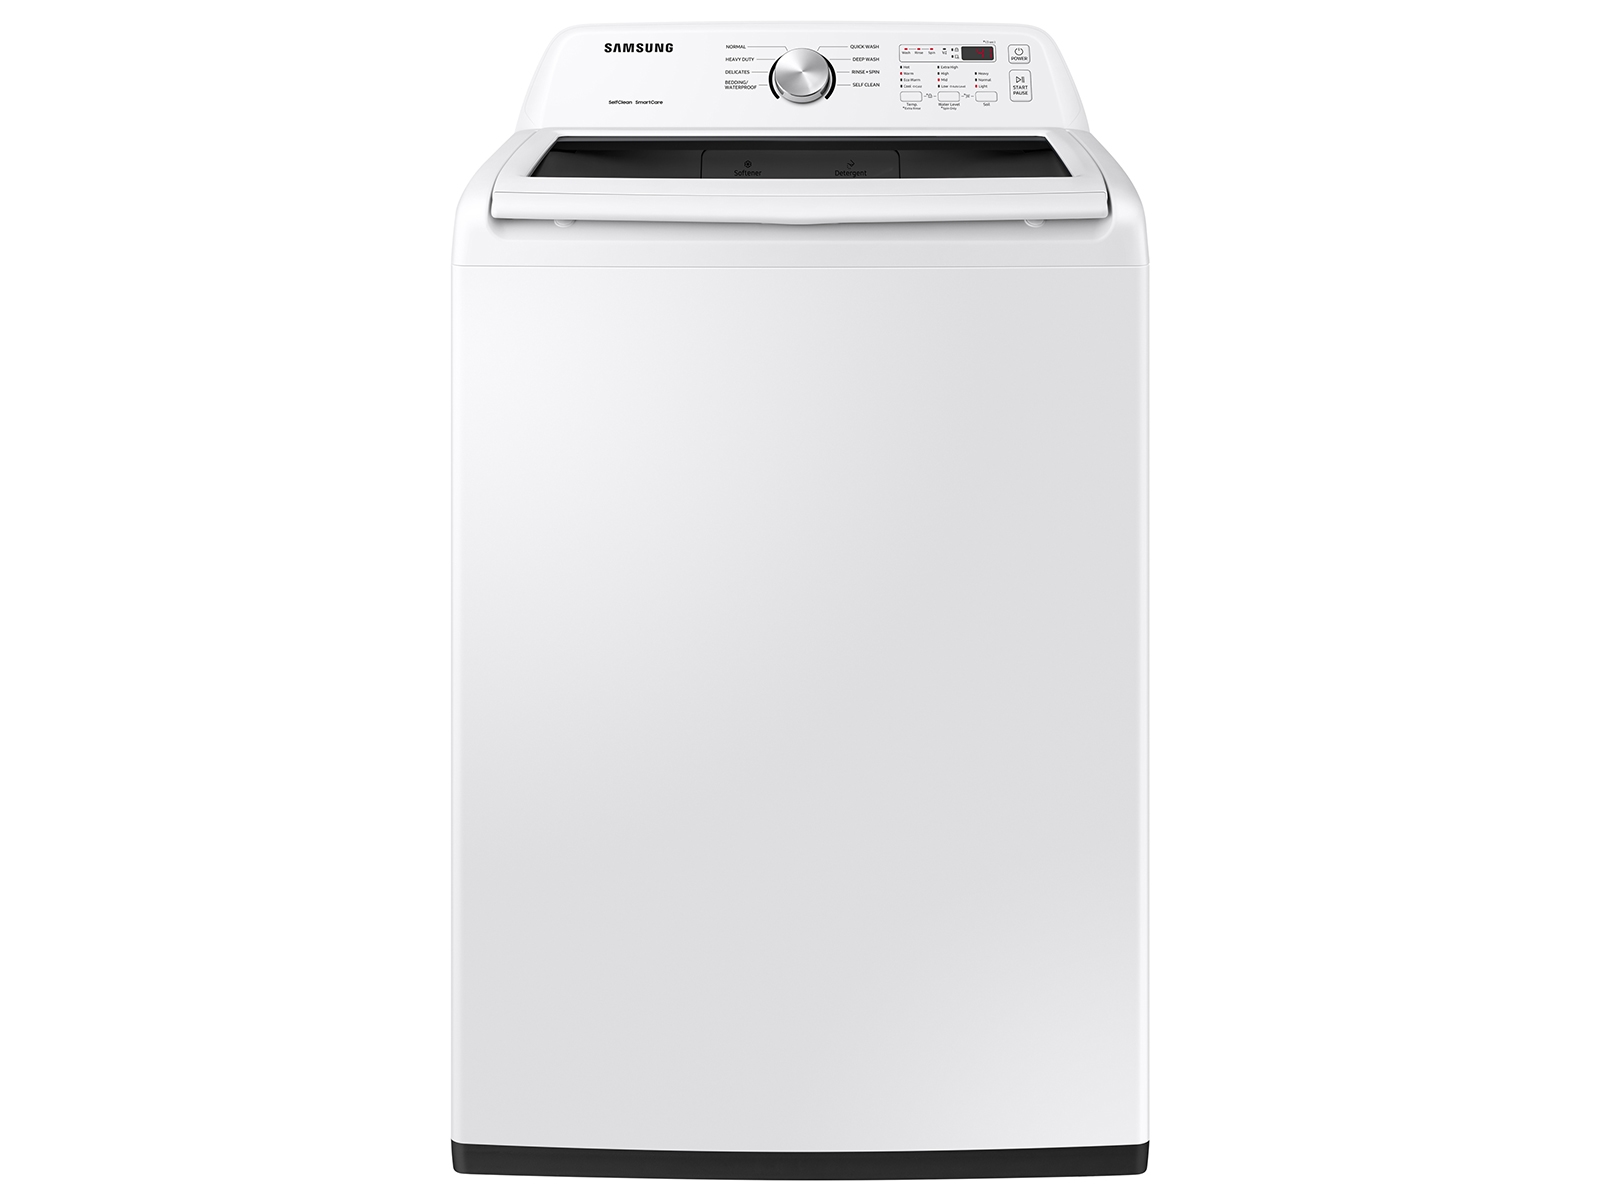 Samsung 4.5 cu. ft. Top Load Washer with Vibration Reduction Technology+ in White(WA45T3200AW/A4)